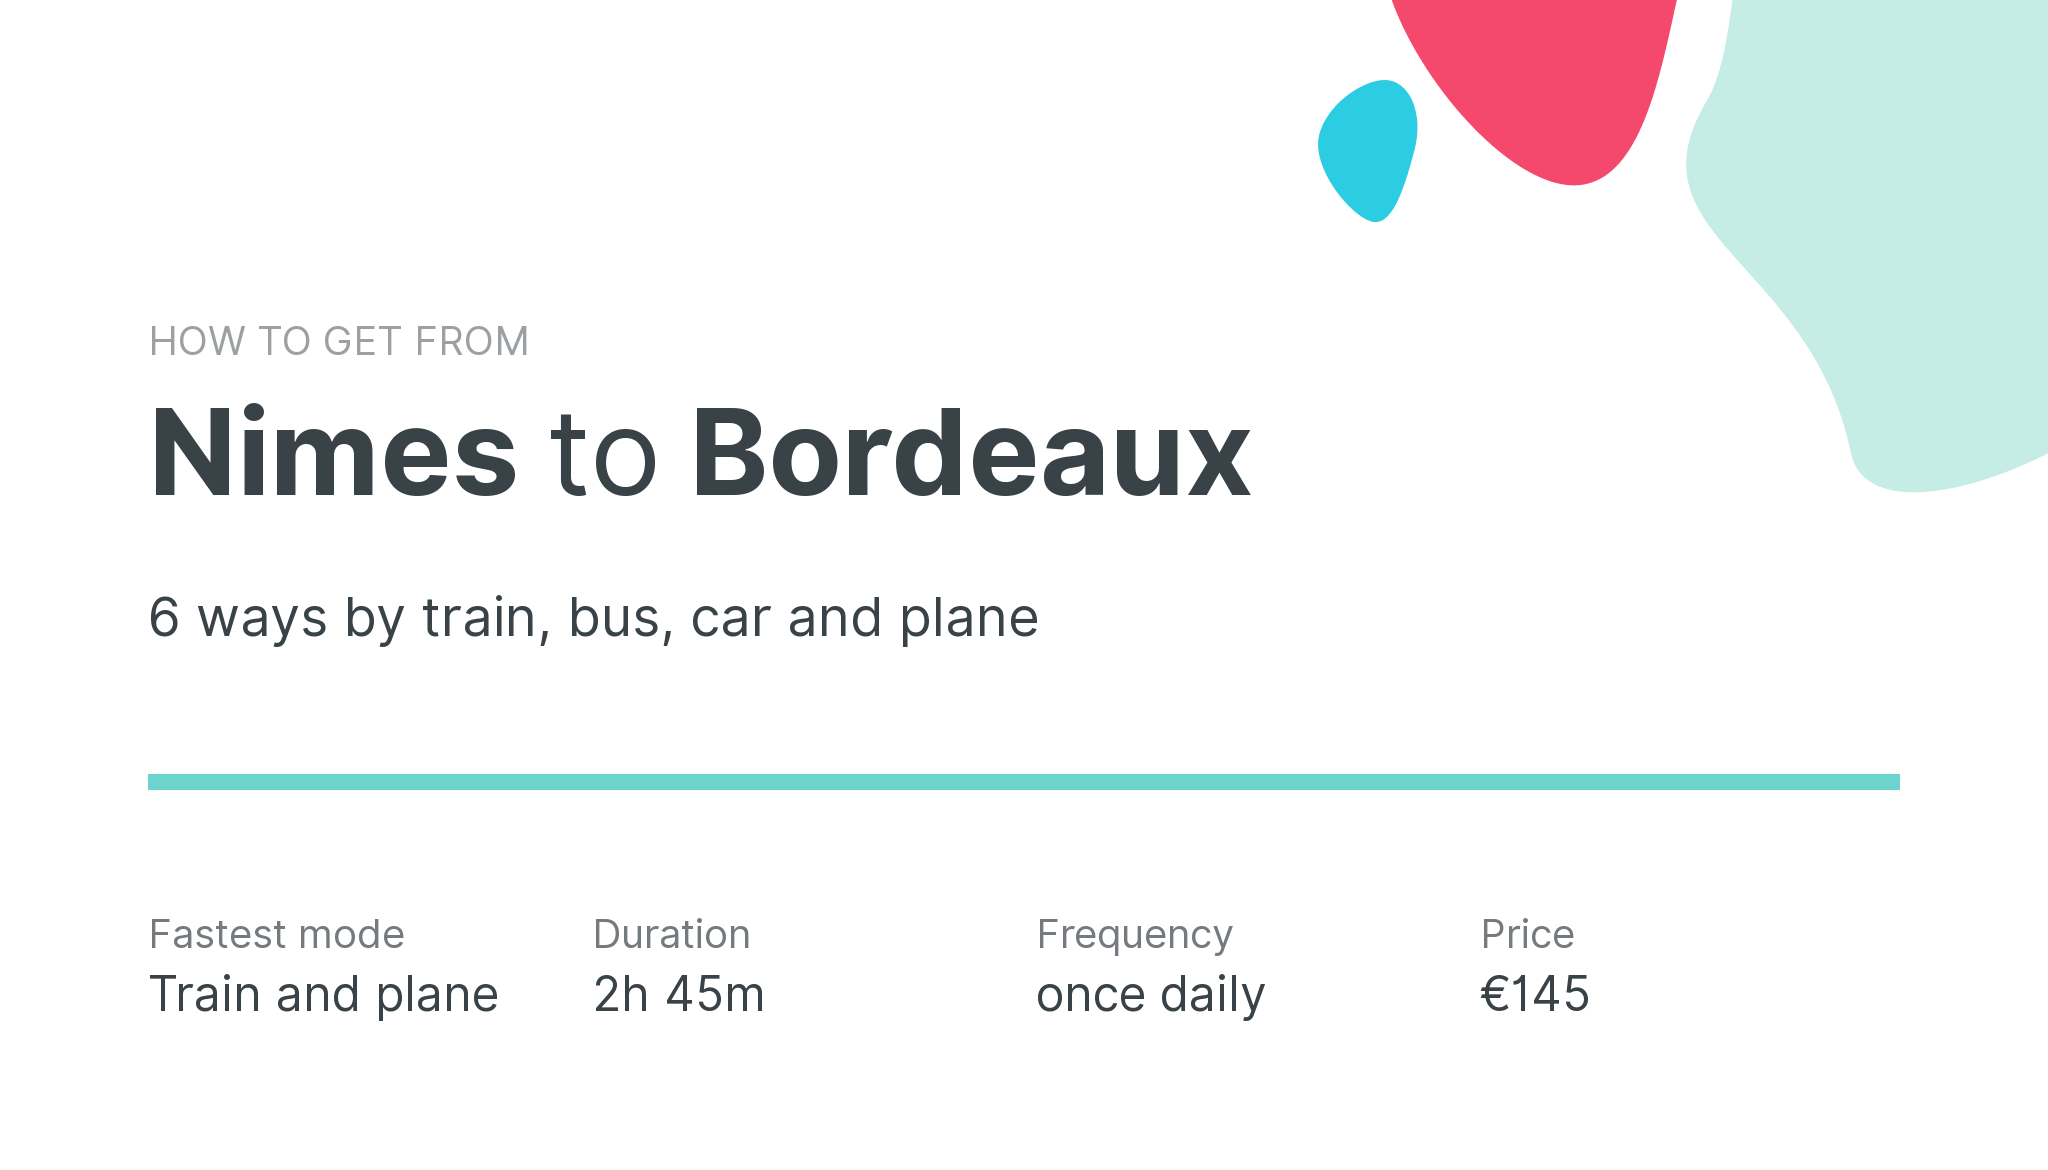 How do I get from Nimes to Bordeaux